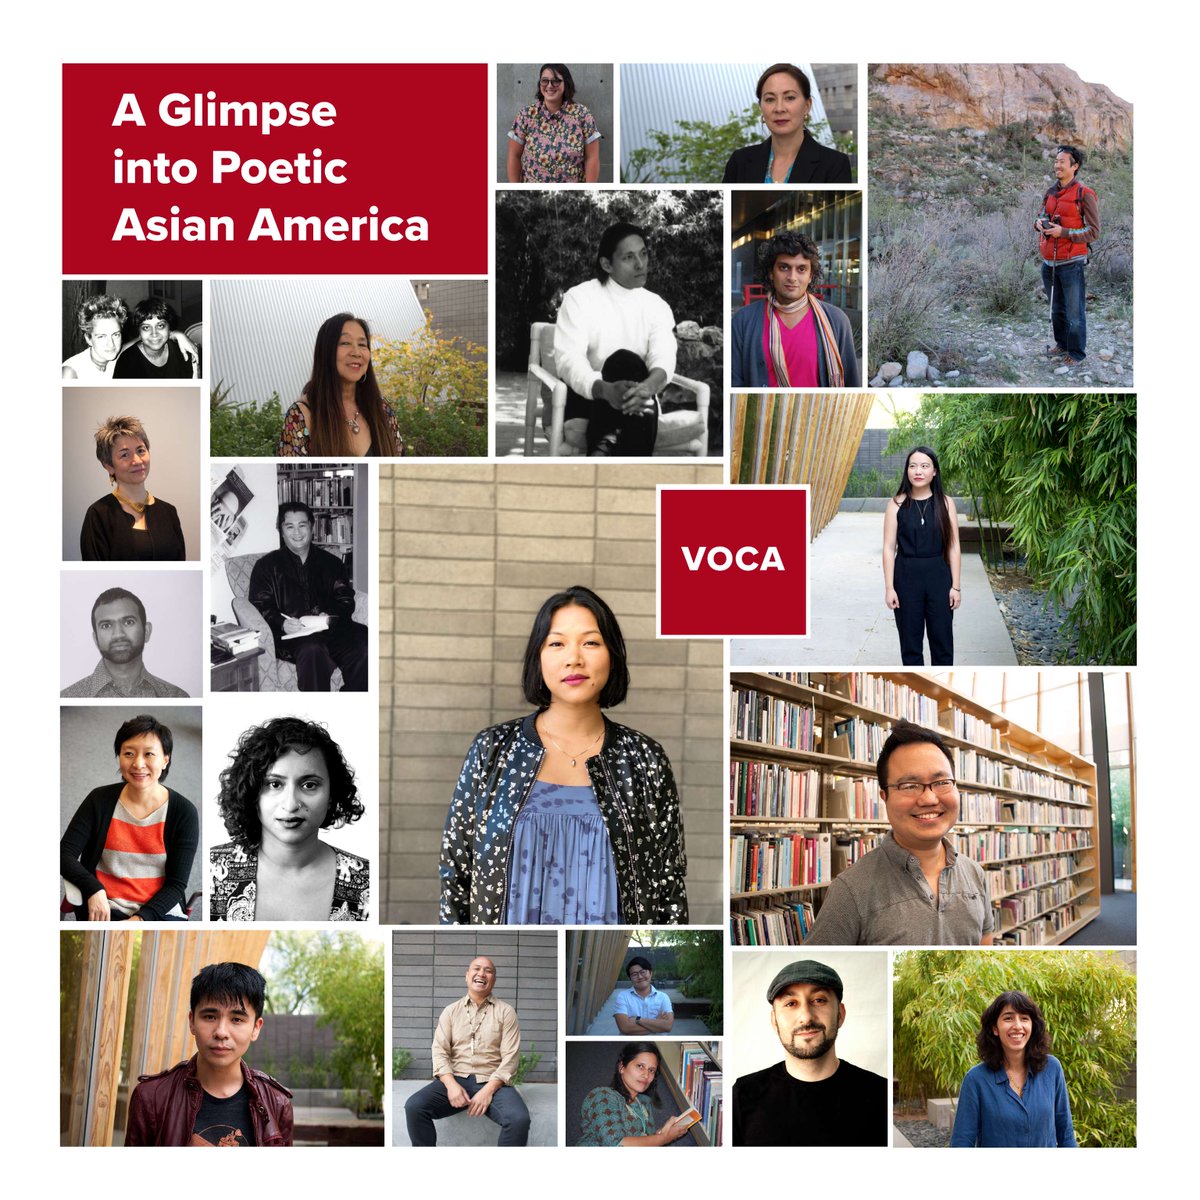 NEW Voca playlist! Curated for Asian American Pacific Islander (AAPI) Heritage Month and spanning the years 1990-2023, this selection of work seeks to capture the aesthetic and thematic range of Asian American and Pacific Islander poets. voca.arizona.edu/playlists/glim…